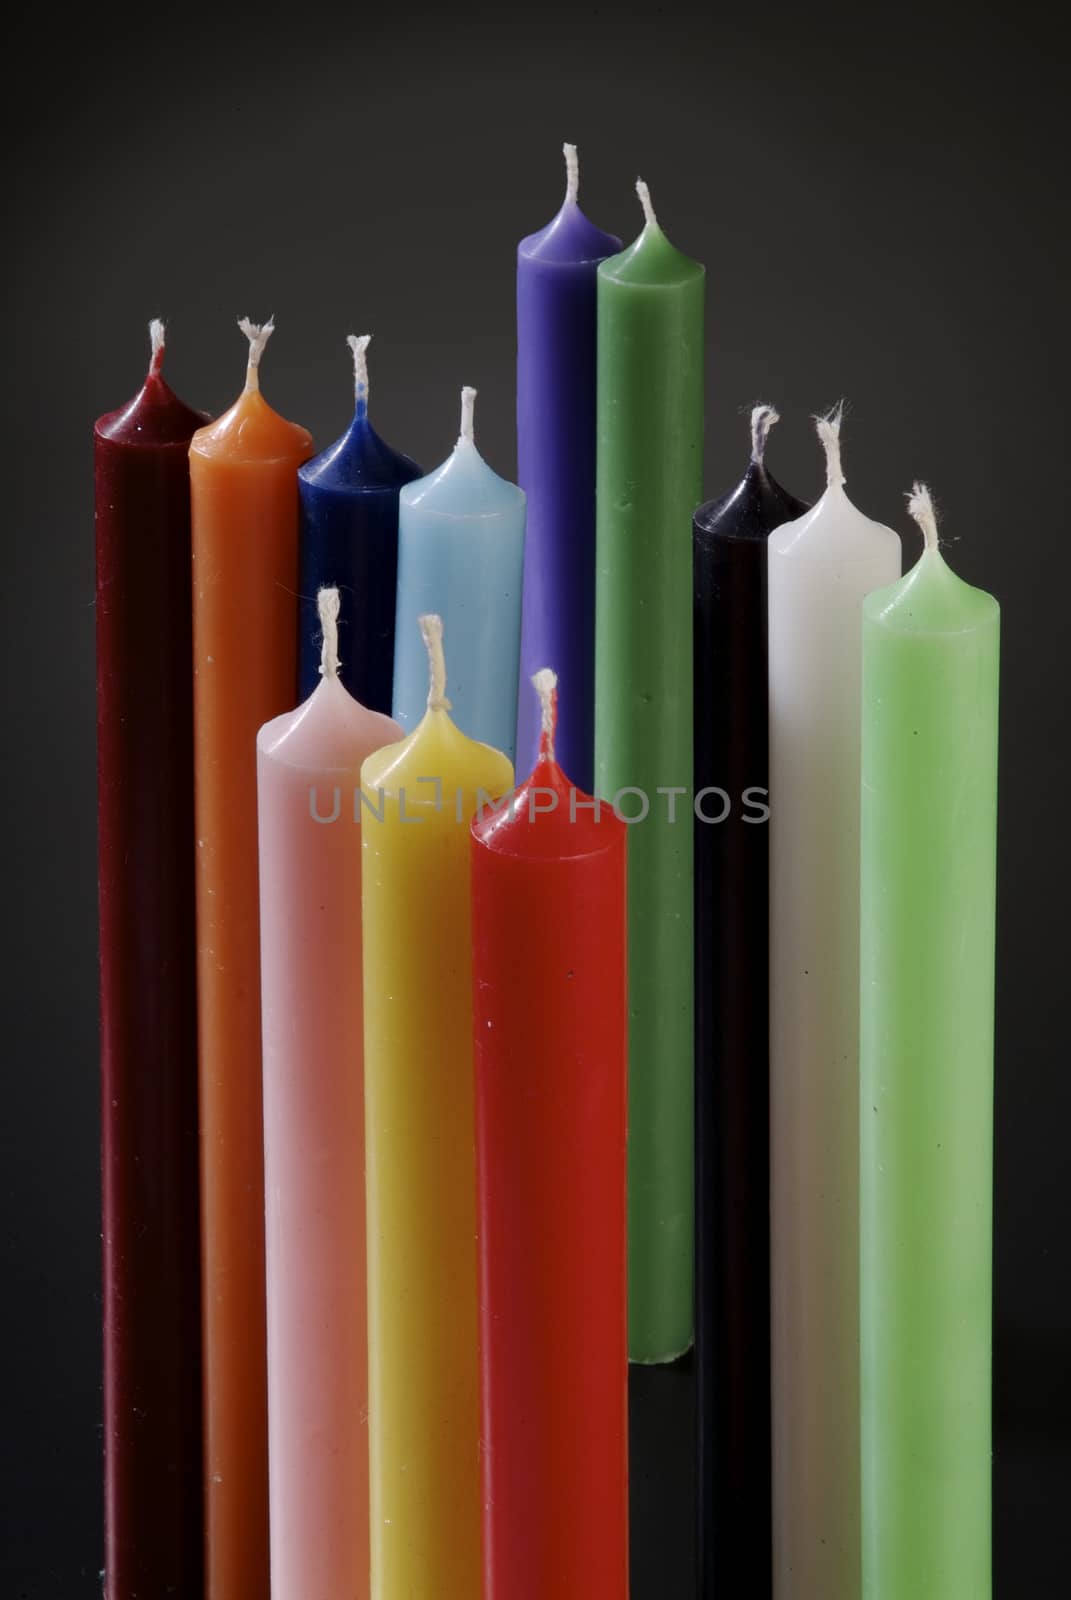 group of colorful cylindrical candles g by diecidodici